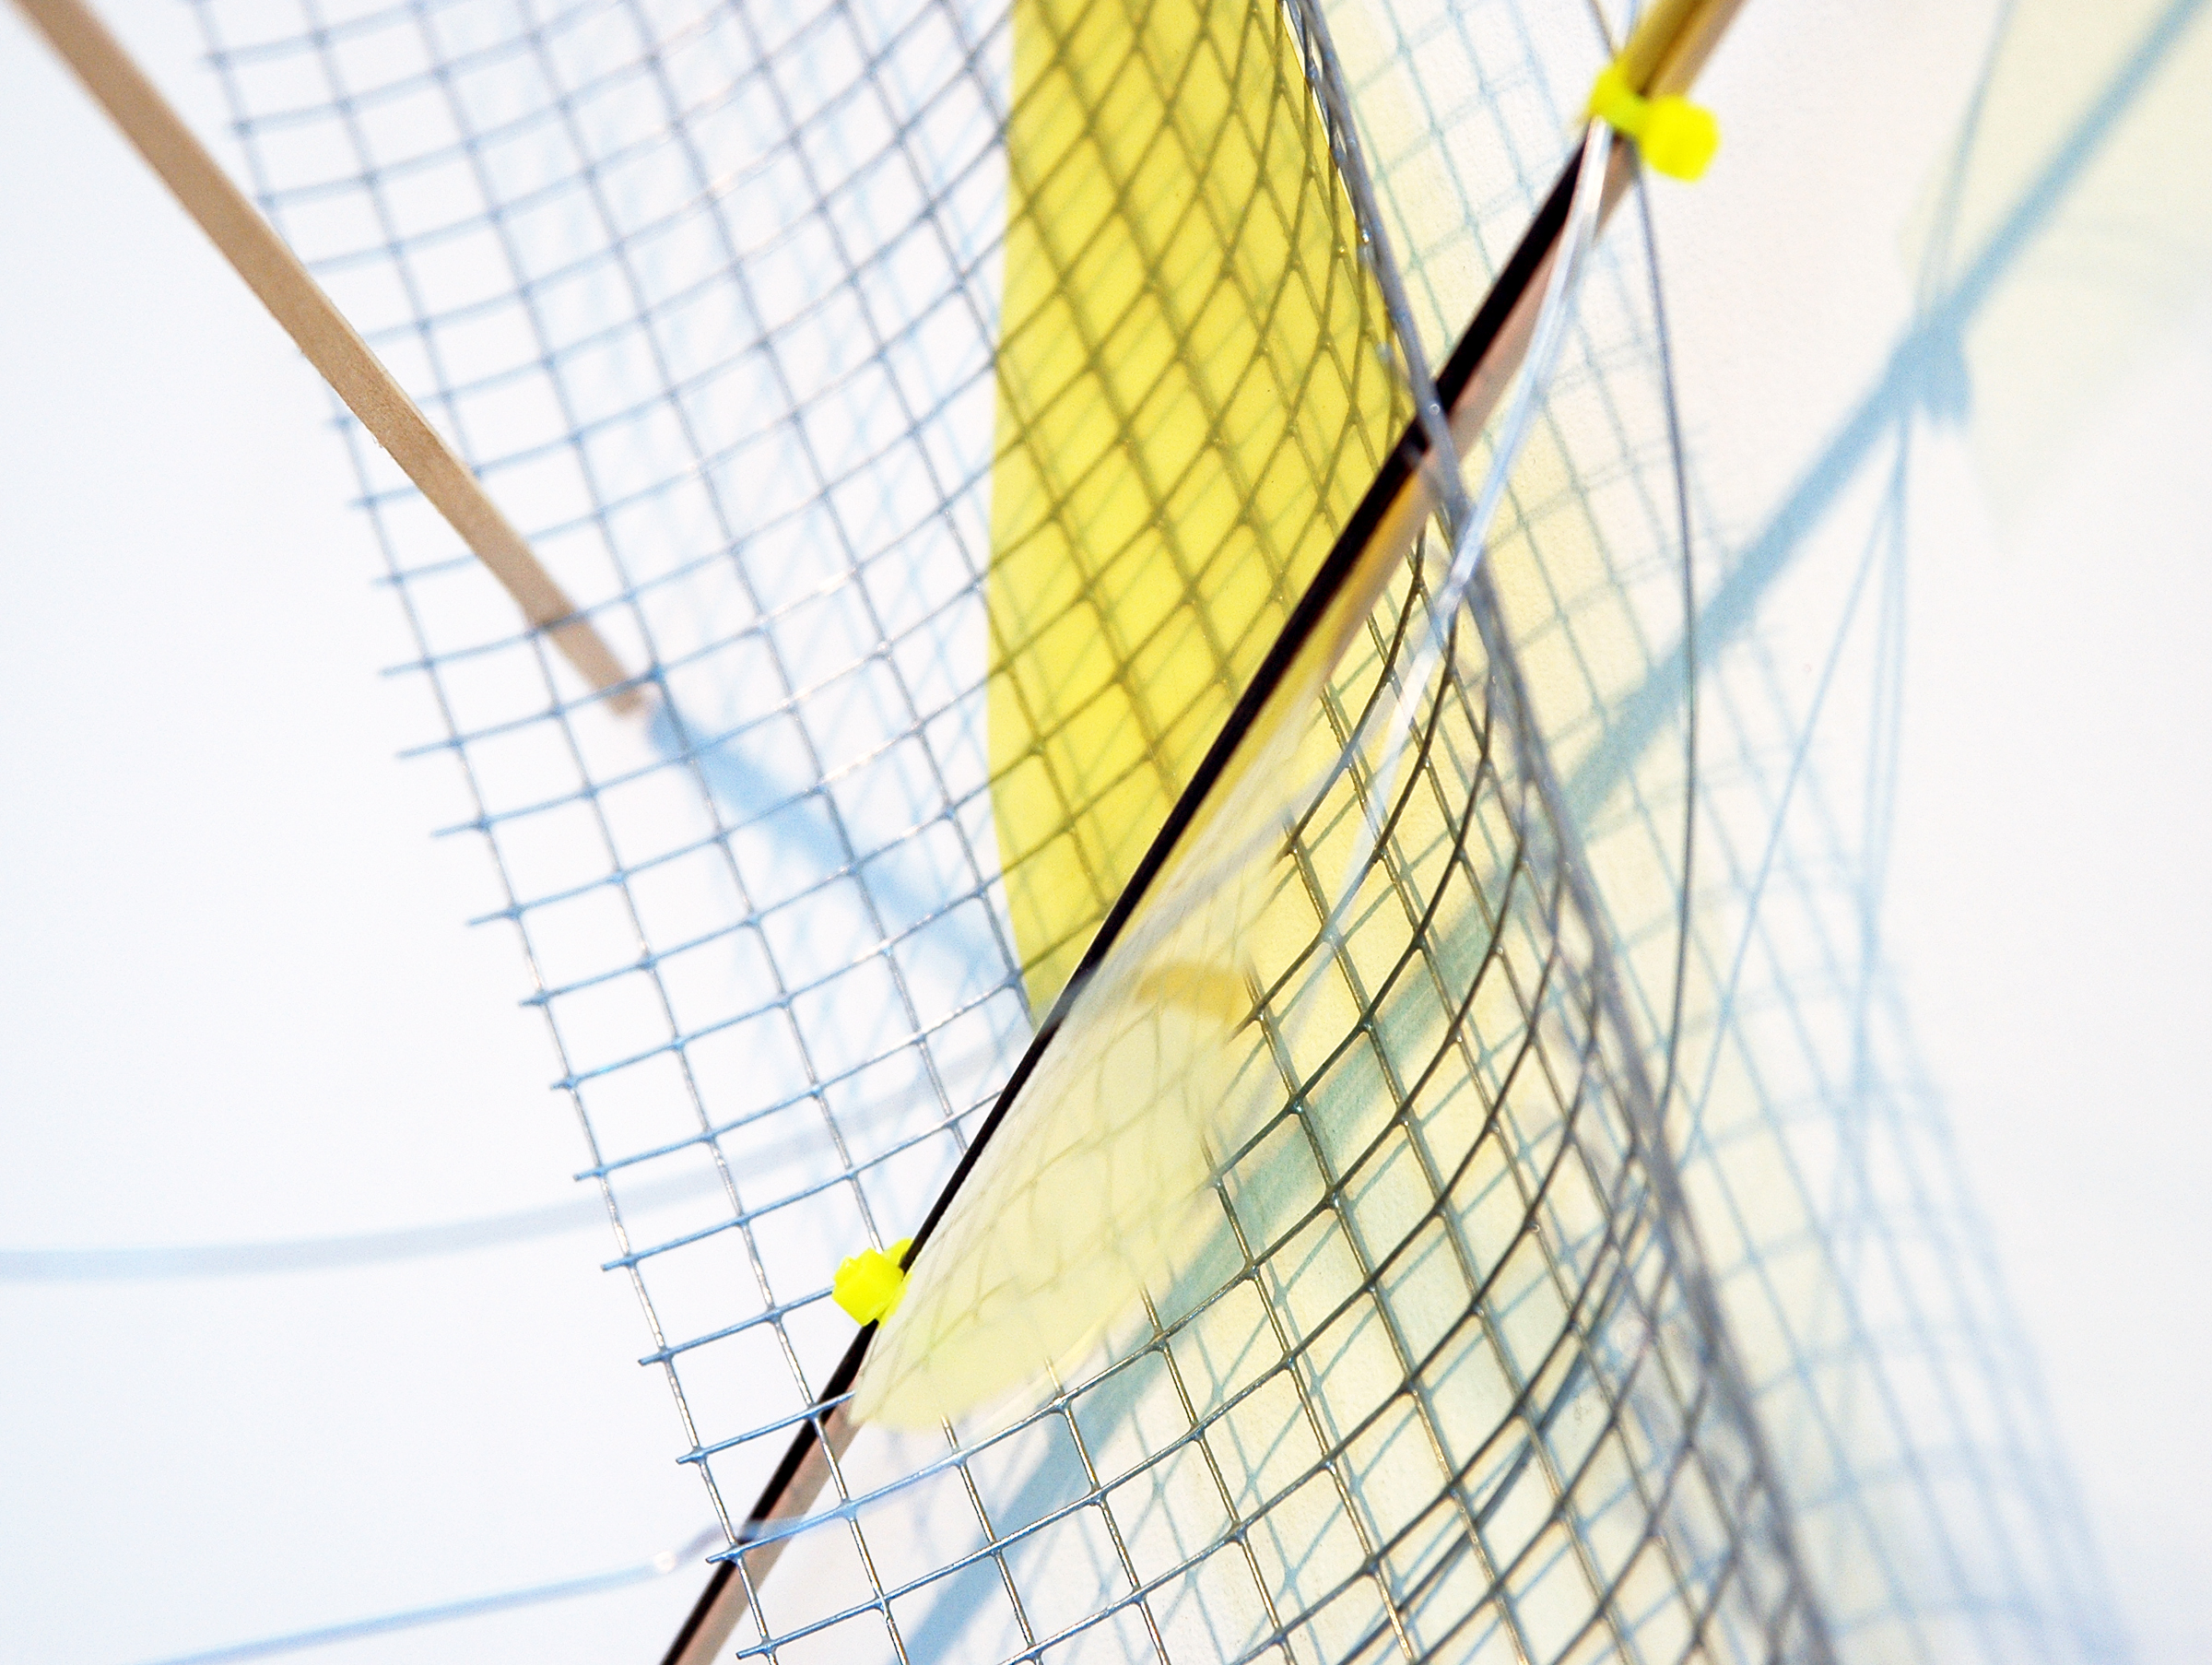   ALICE CATTANEO   (detail) Untitled , 2013, iron netting, balsa wood, iron, yellow acetate, cable ties, wire, 37.5" x 40" x 17.5" 